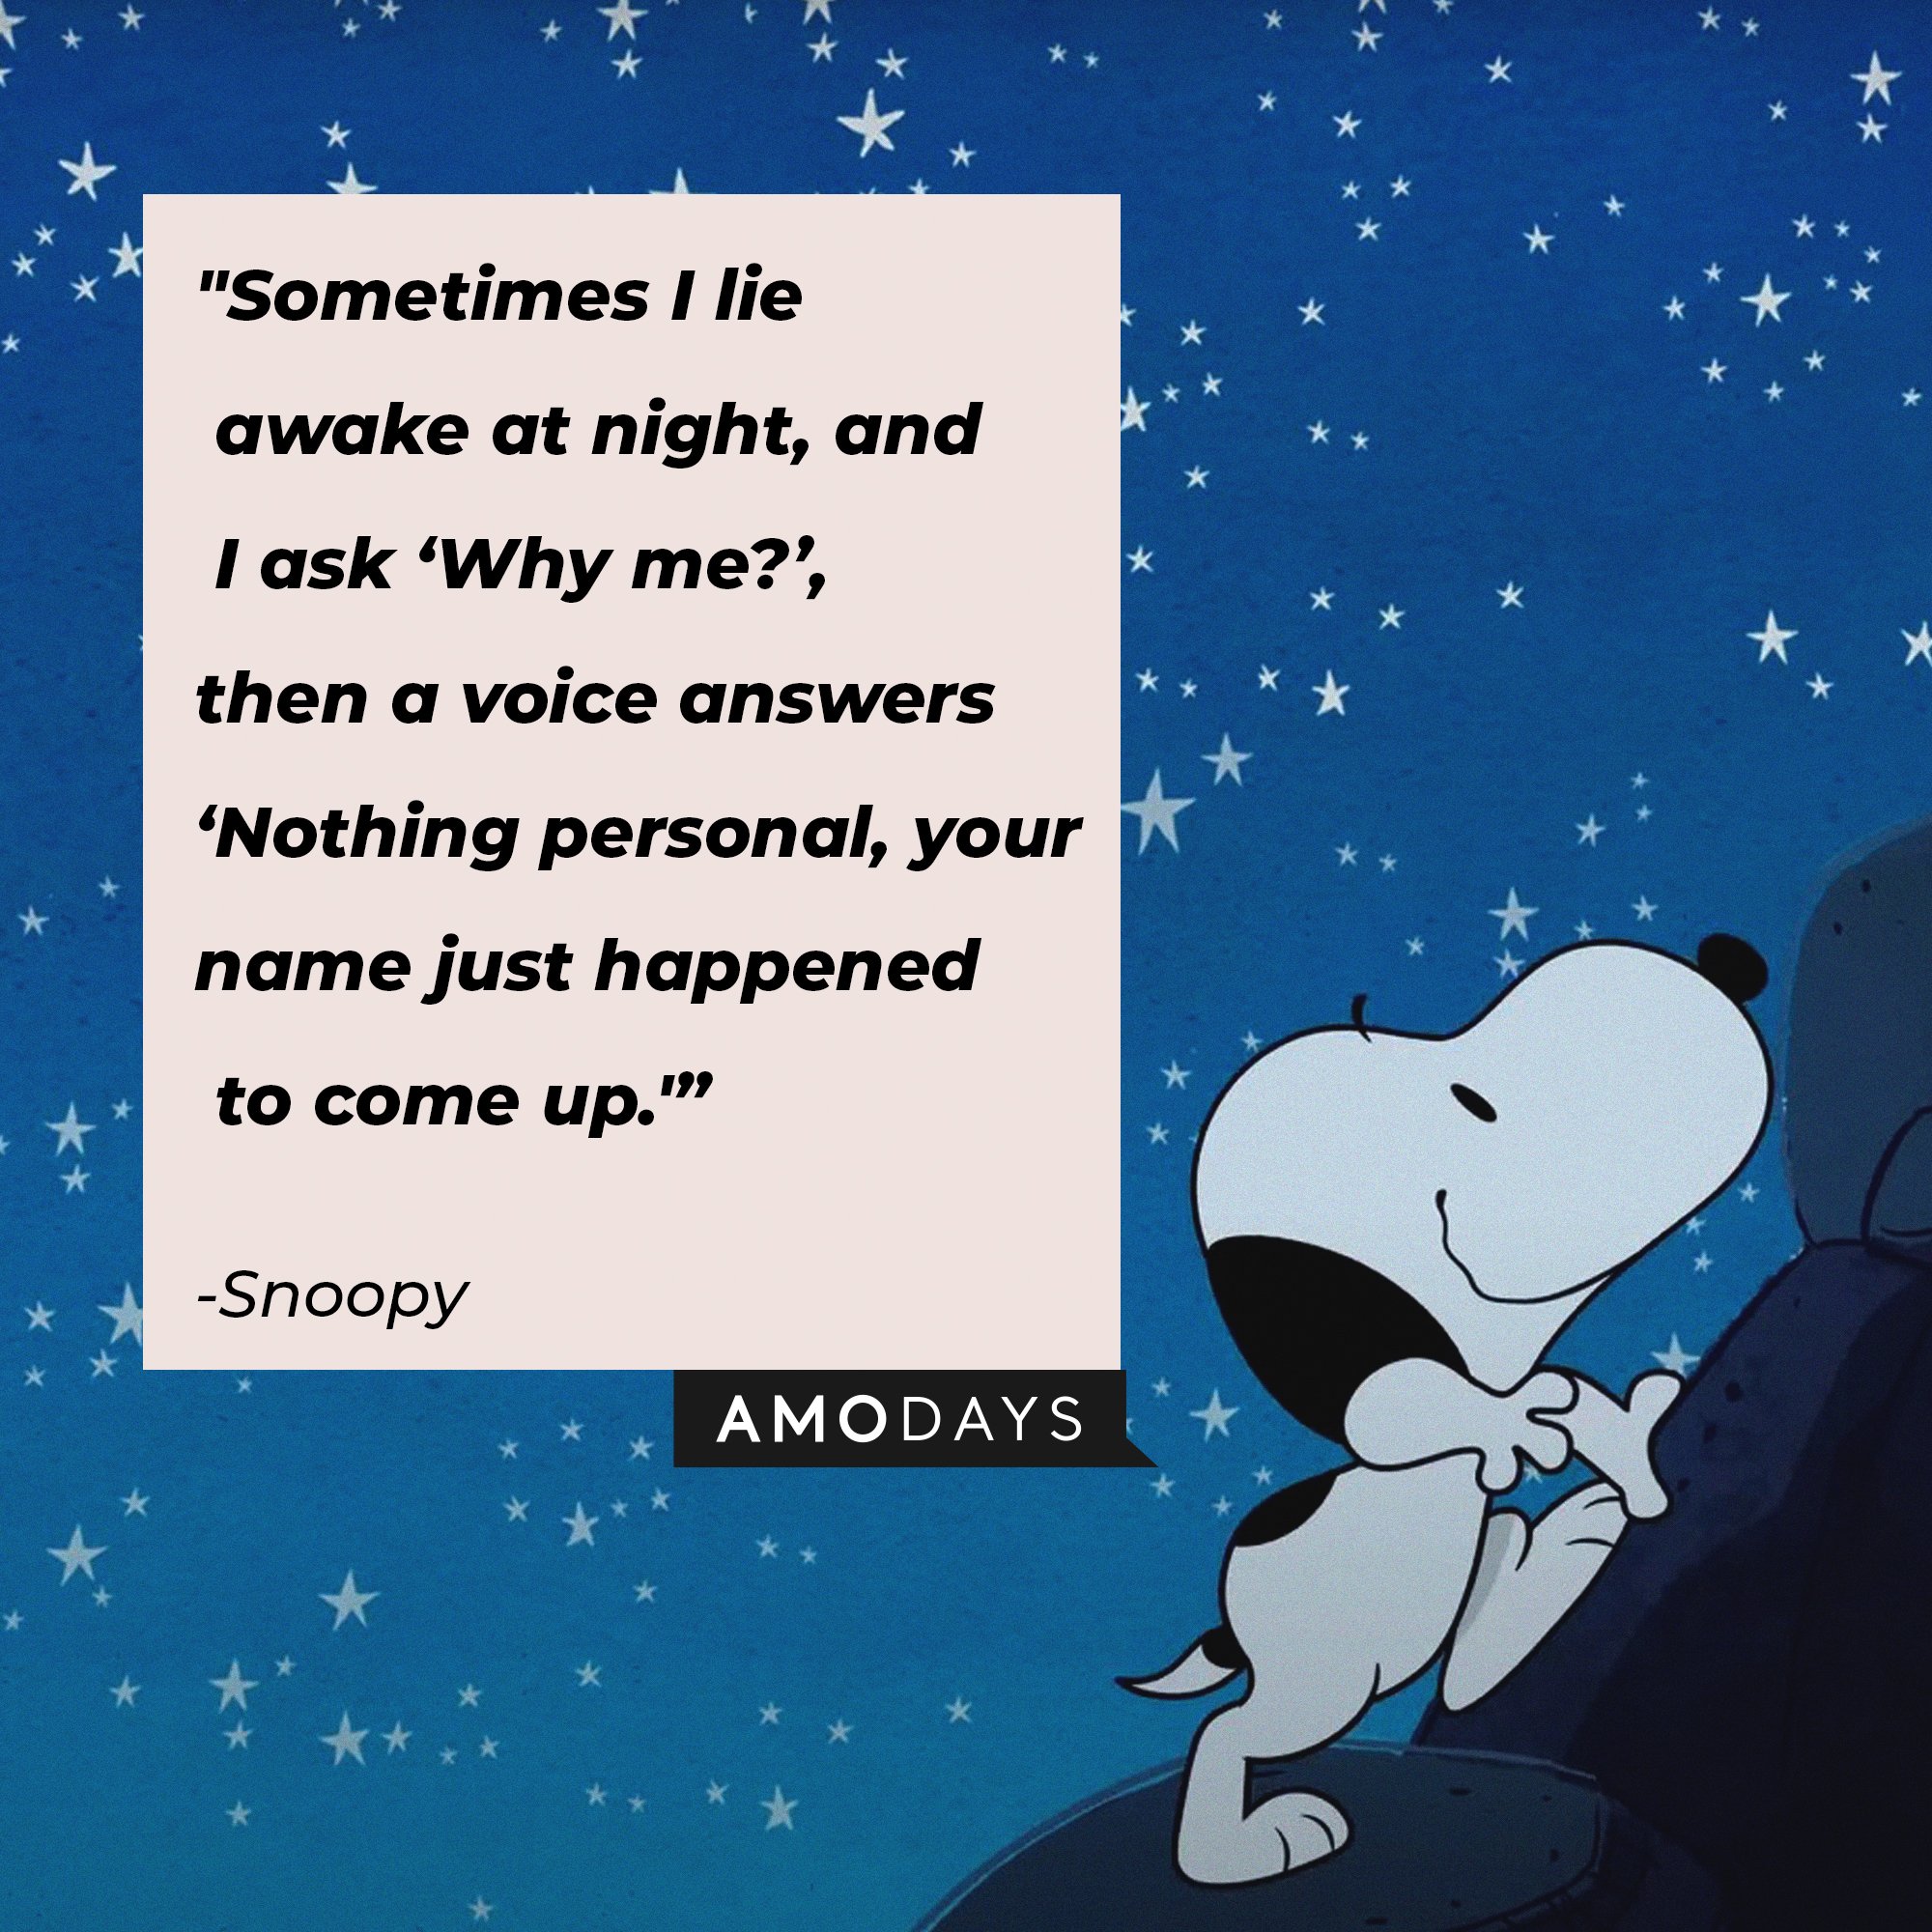 Snoopy’s quote: "Sometimes I lie awake at night, and I ask ‘Why me?’, then a voice answers ‘Nothing personal, your name just happened to come up.'” | Image: AmoDays